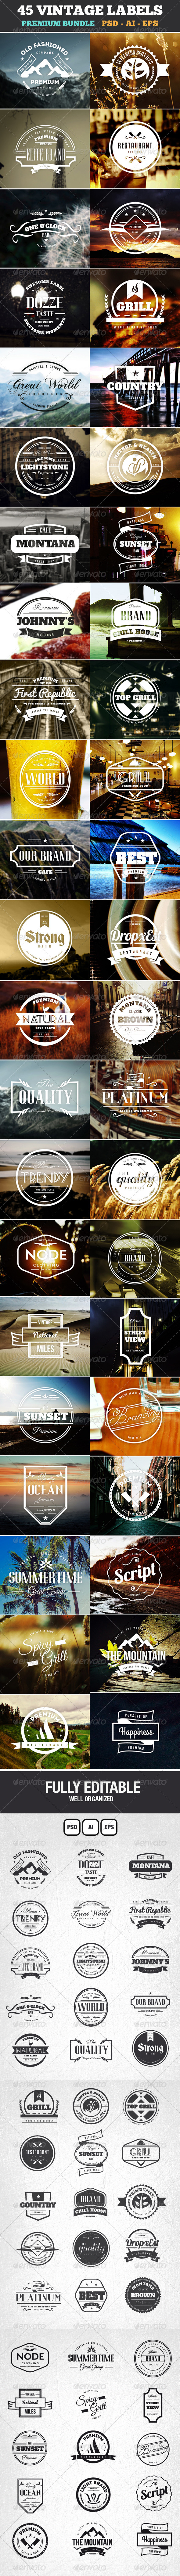 Graphics: Ads Background Badge Banner Banners Beer Bundle Classic Coffee Coffee Logo Emblem Emblem Logo Grunge Hipster Insignia Label Logo Modern Mountain Mountain Logo Old Old School Premium Retro Stamp Stamps Sticker Typography Vintage Web